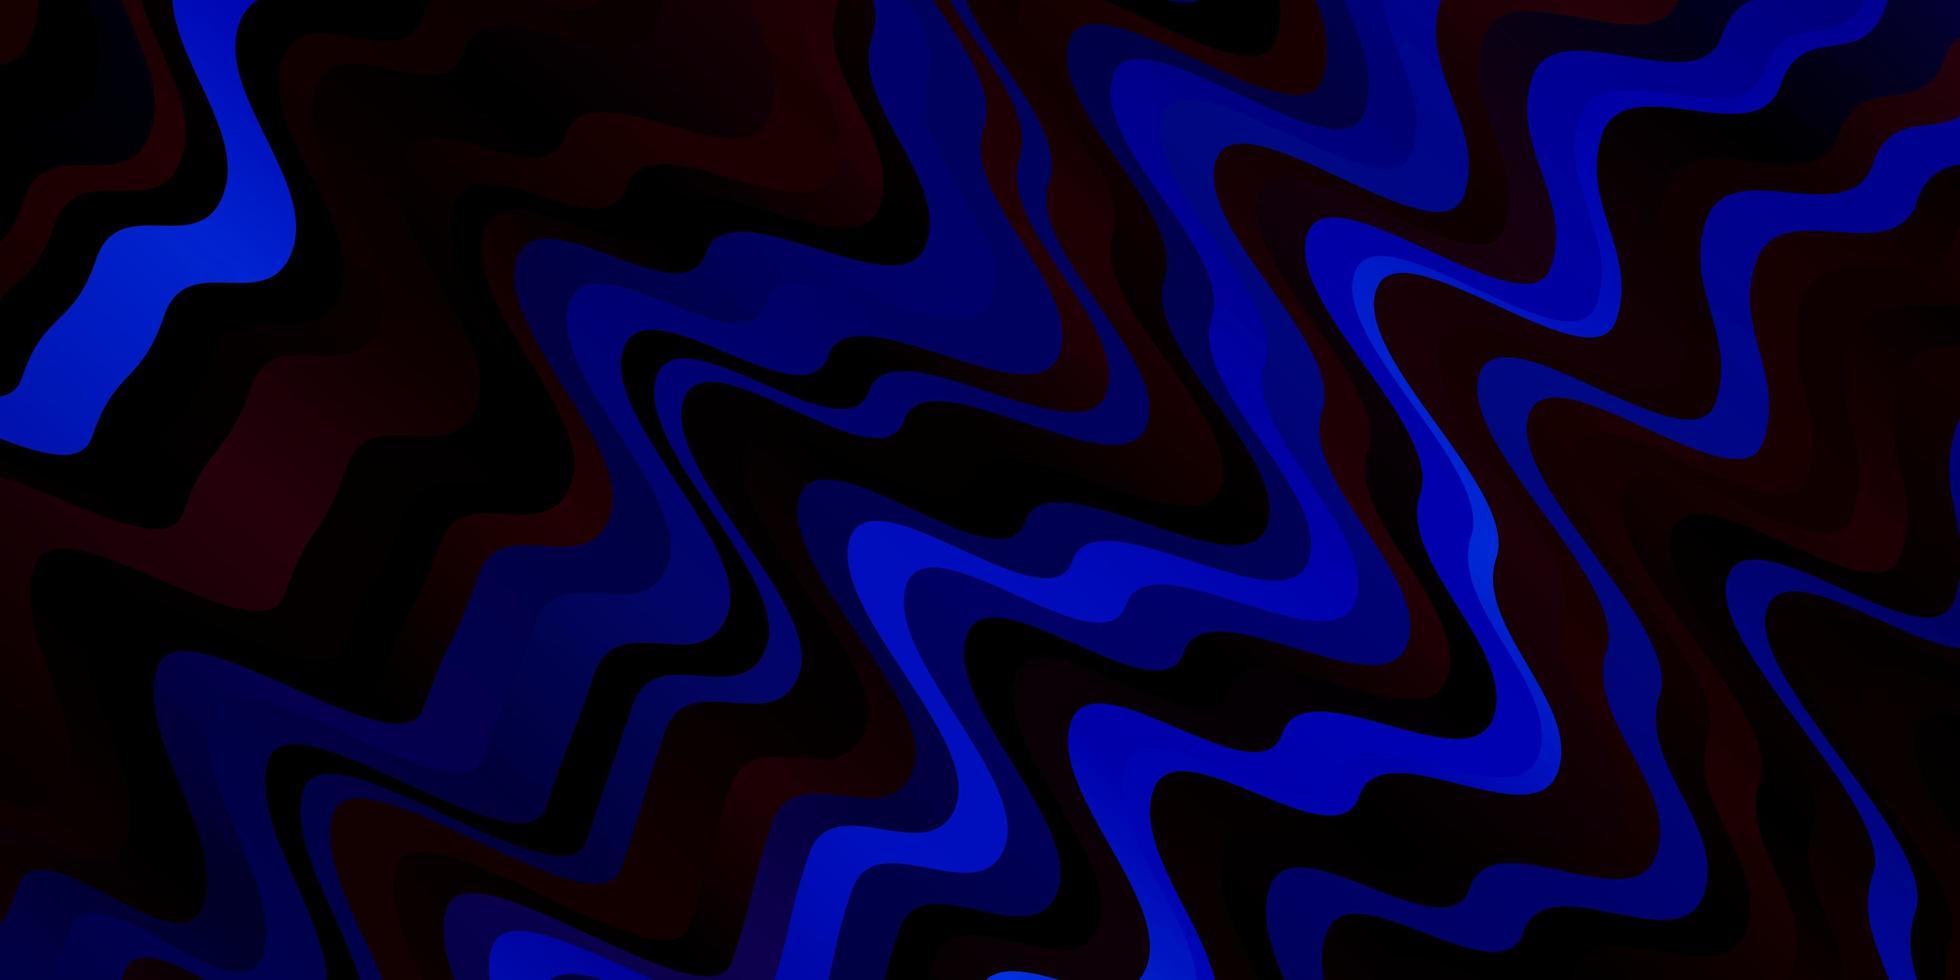 Dark Blue, Red vector pattern with wry lines.